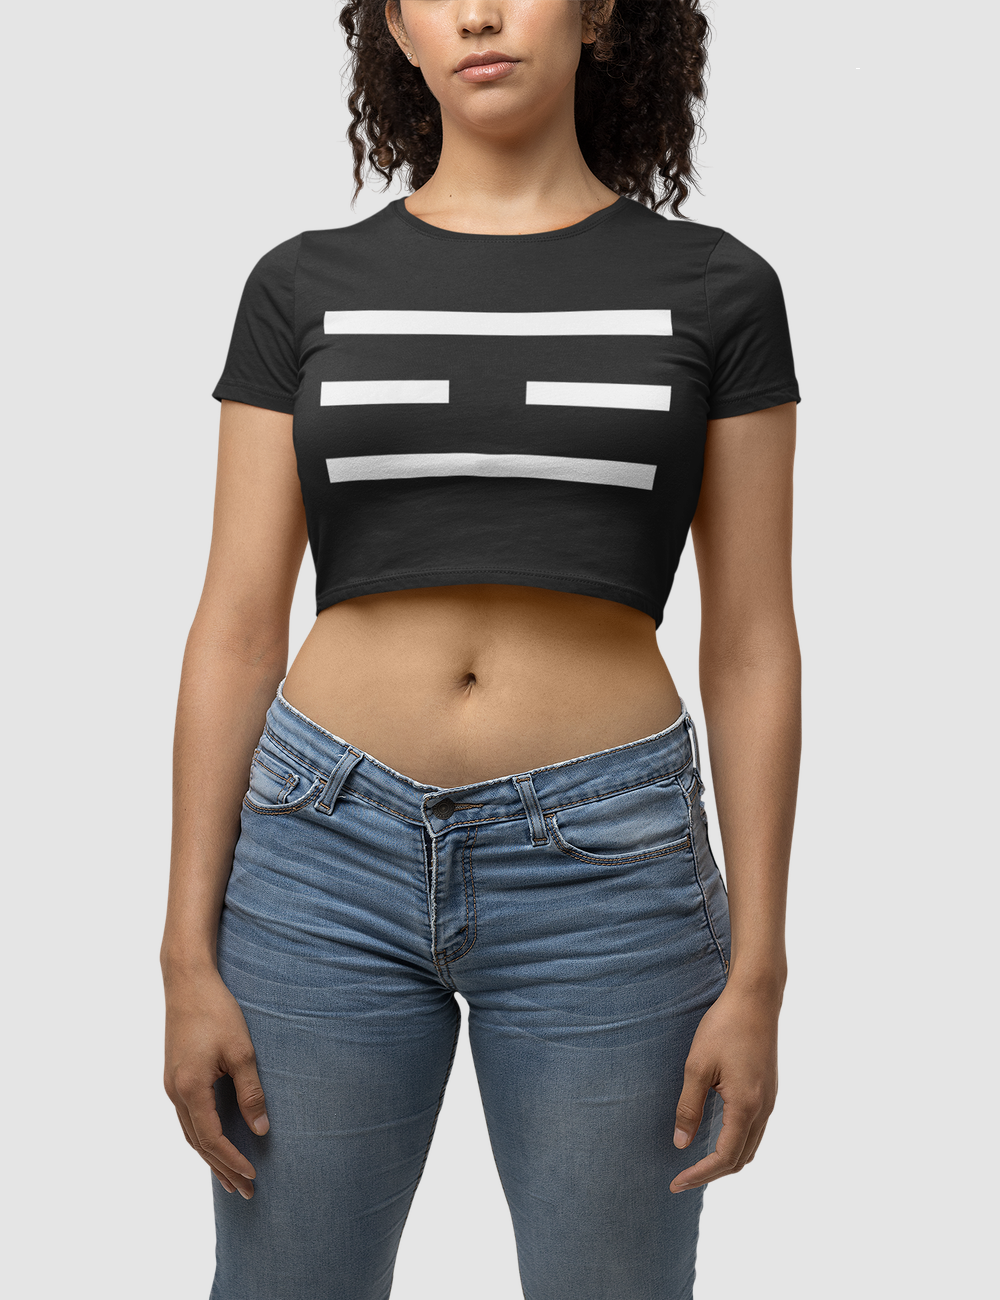 Commodore Oni | Women's Fitted Crop Top T-Shirt OniTakai